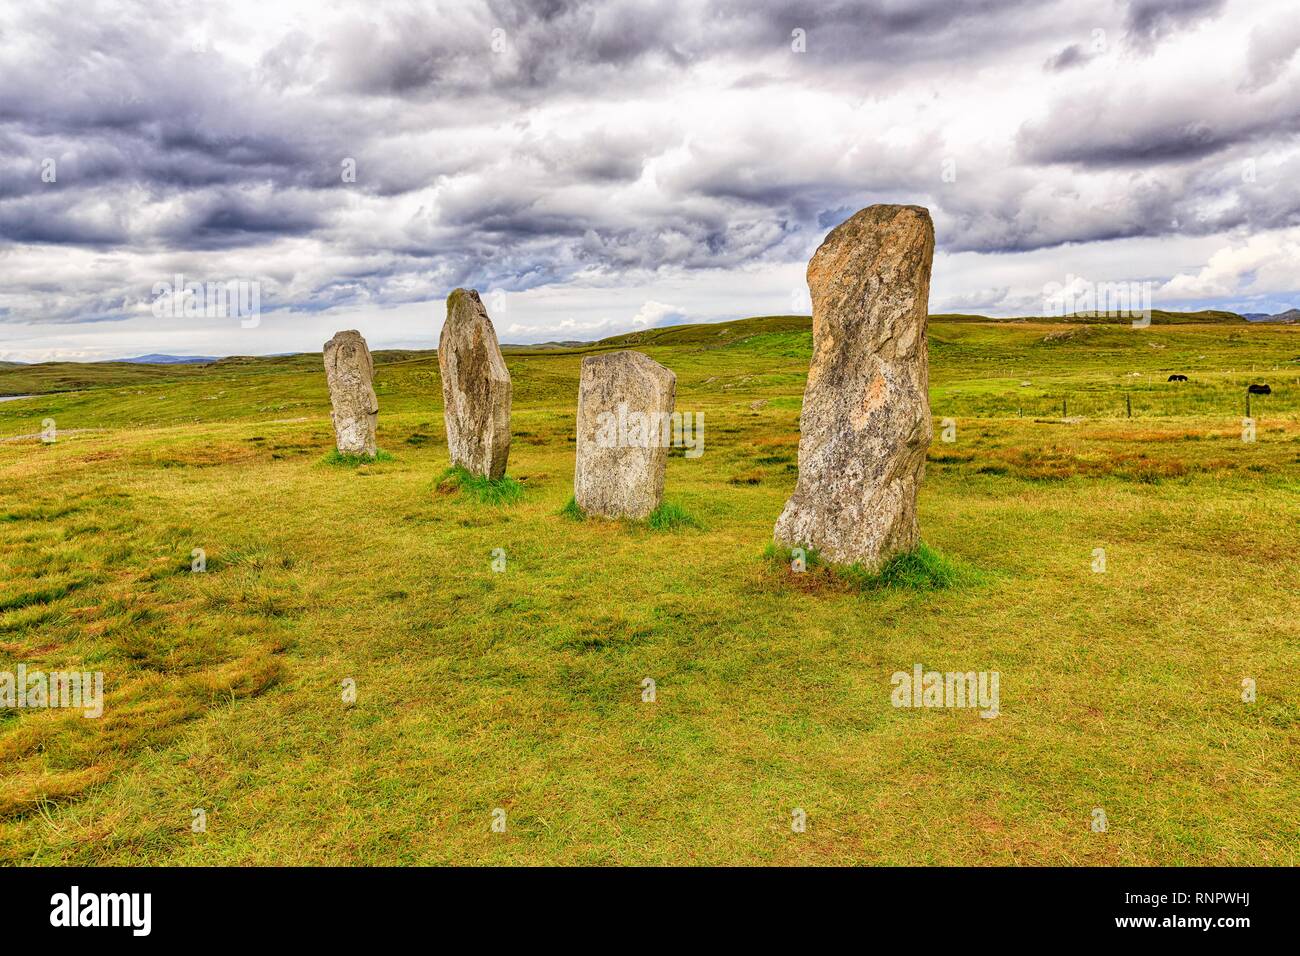 Megalith Stone Formation Callanish Standing Stones, Stone Circle under a Cloudy Sky, Lewis and Harris Island, Outer Hebrides Stock Photo